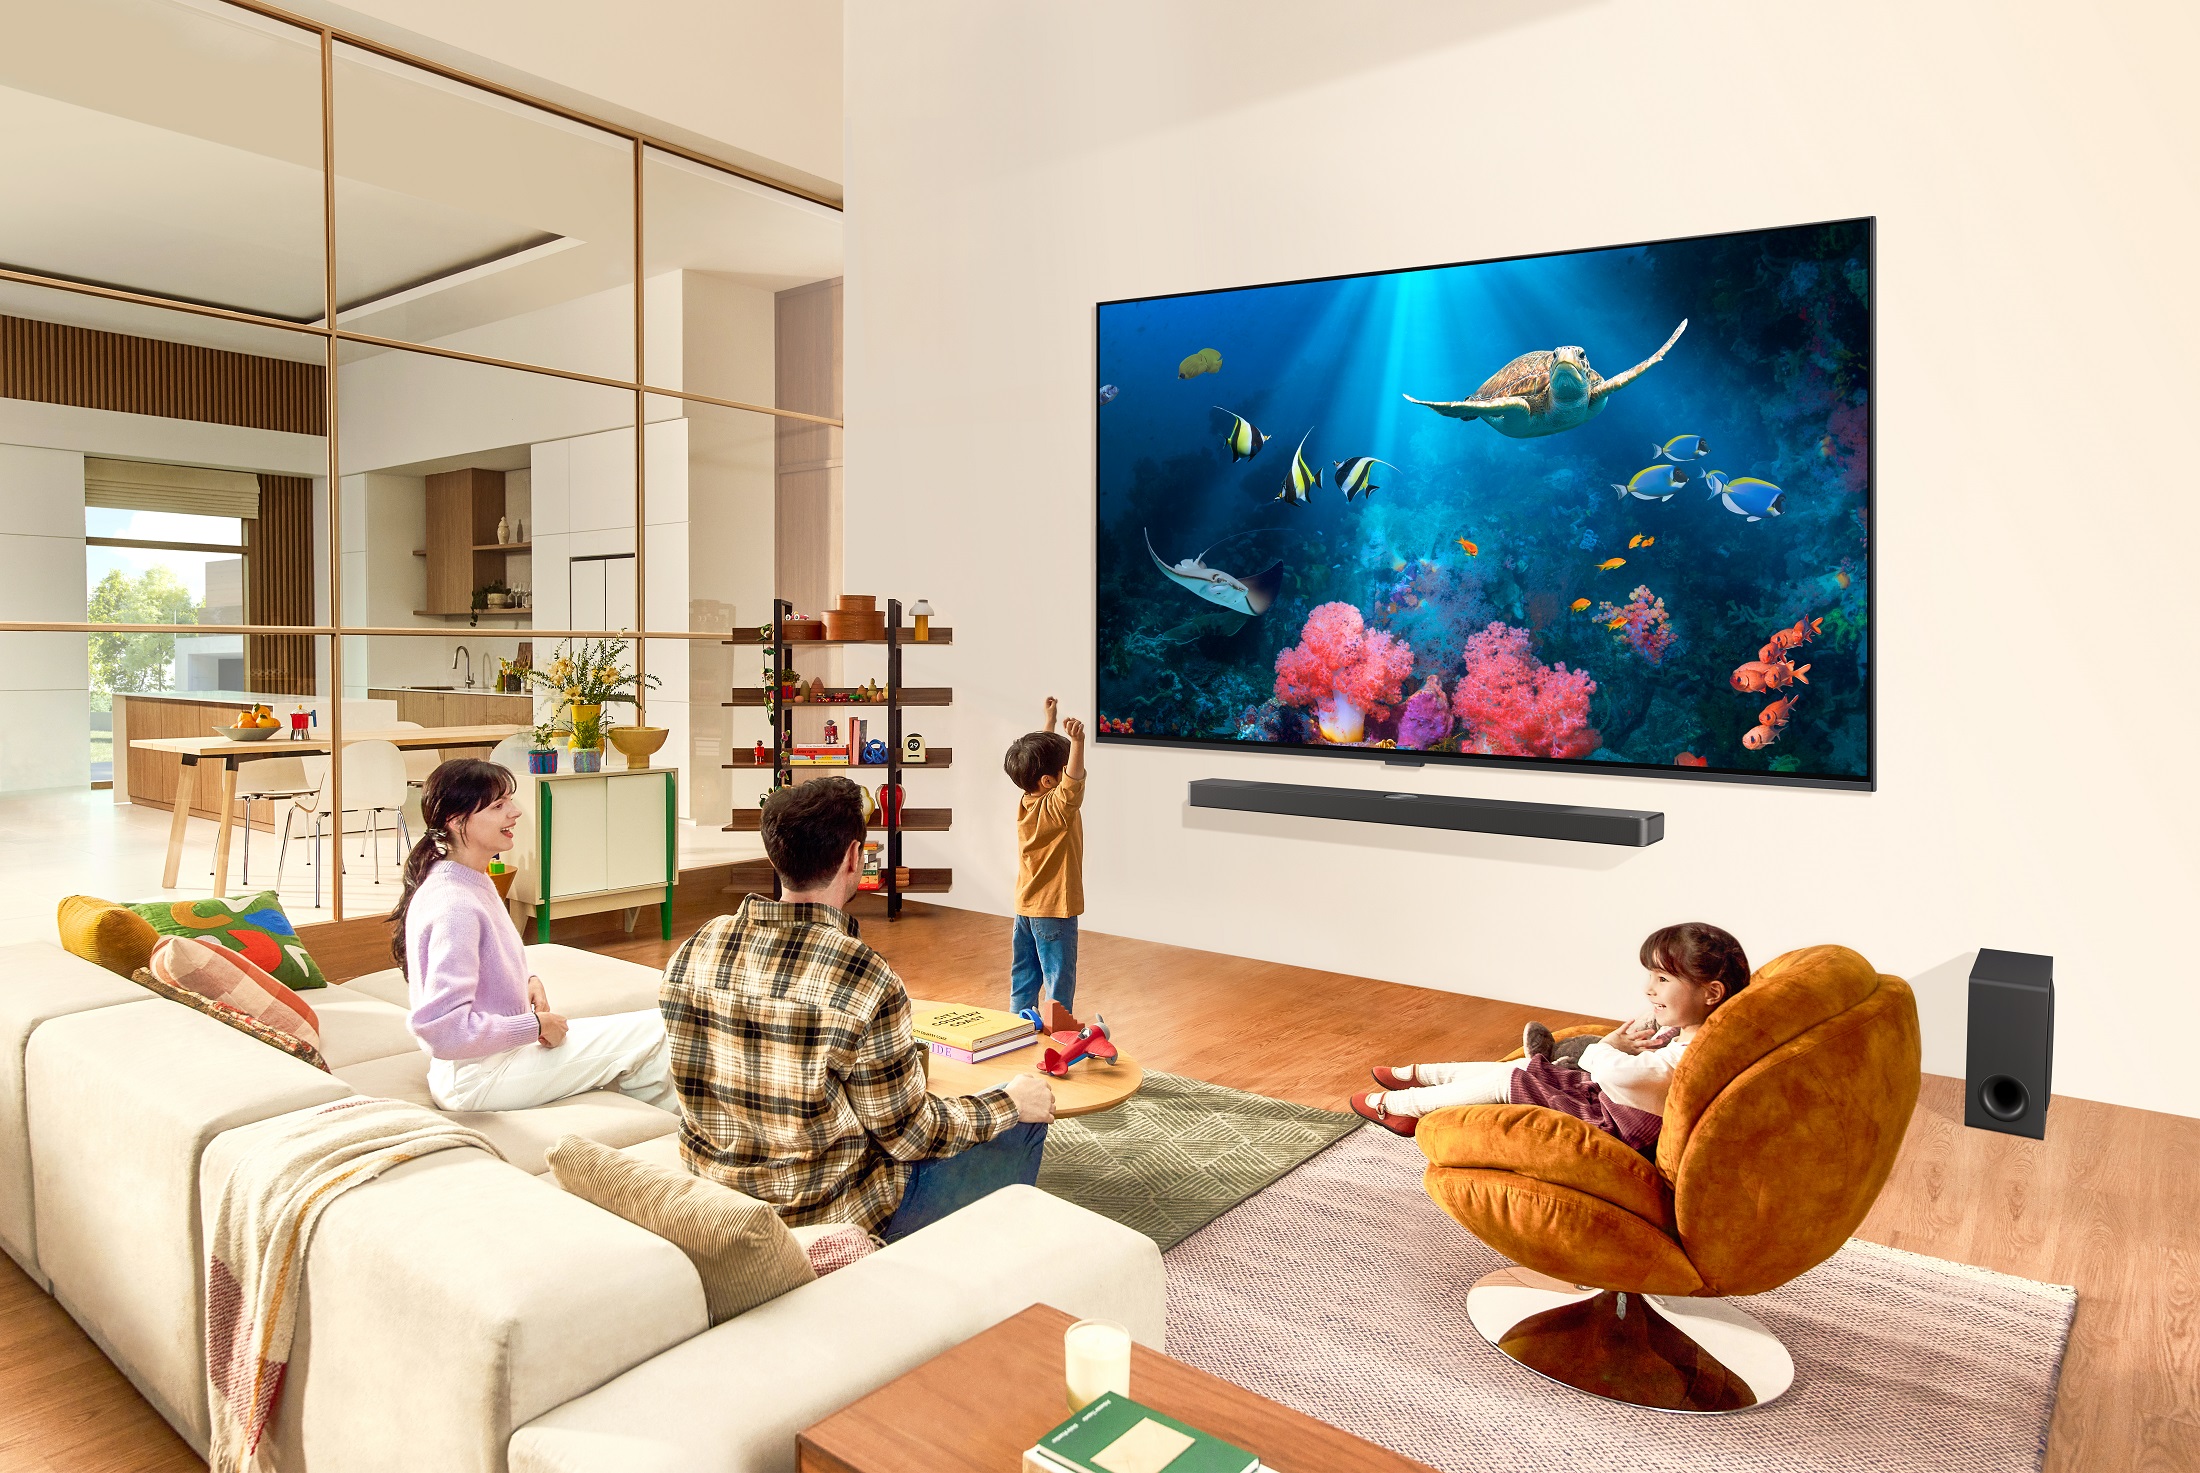 A family gathers around an ultra-large, wall-mounted LG QNED TV displaying an aquarium scene in their living room